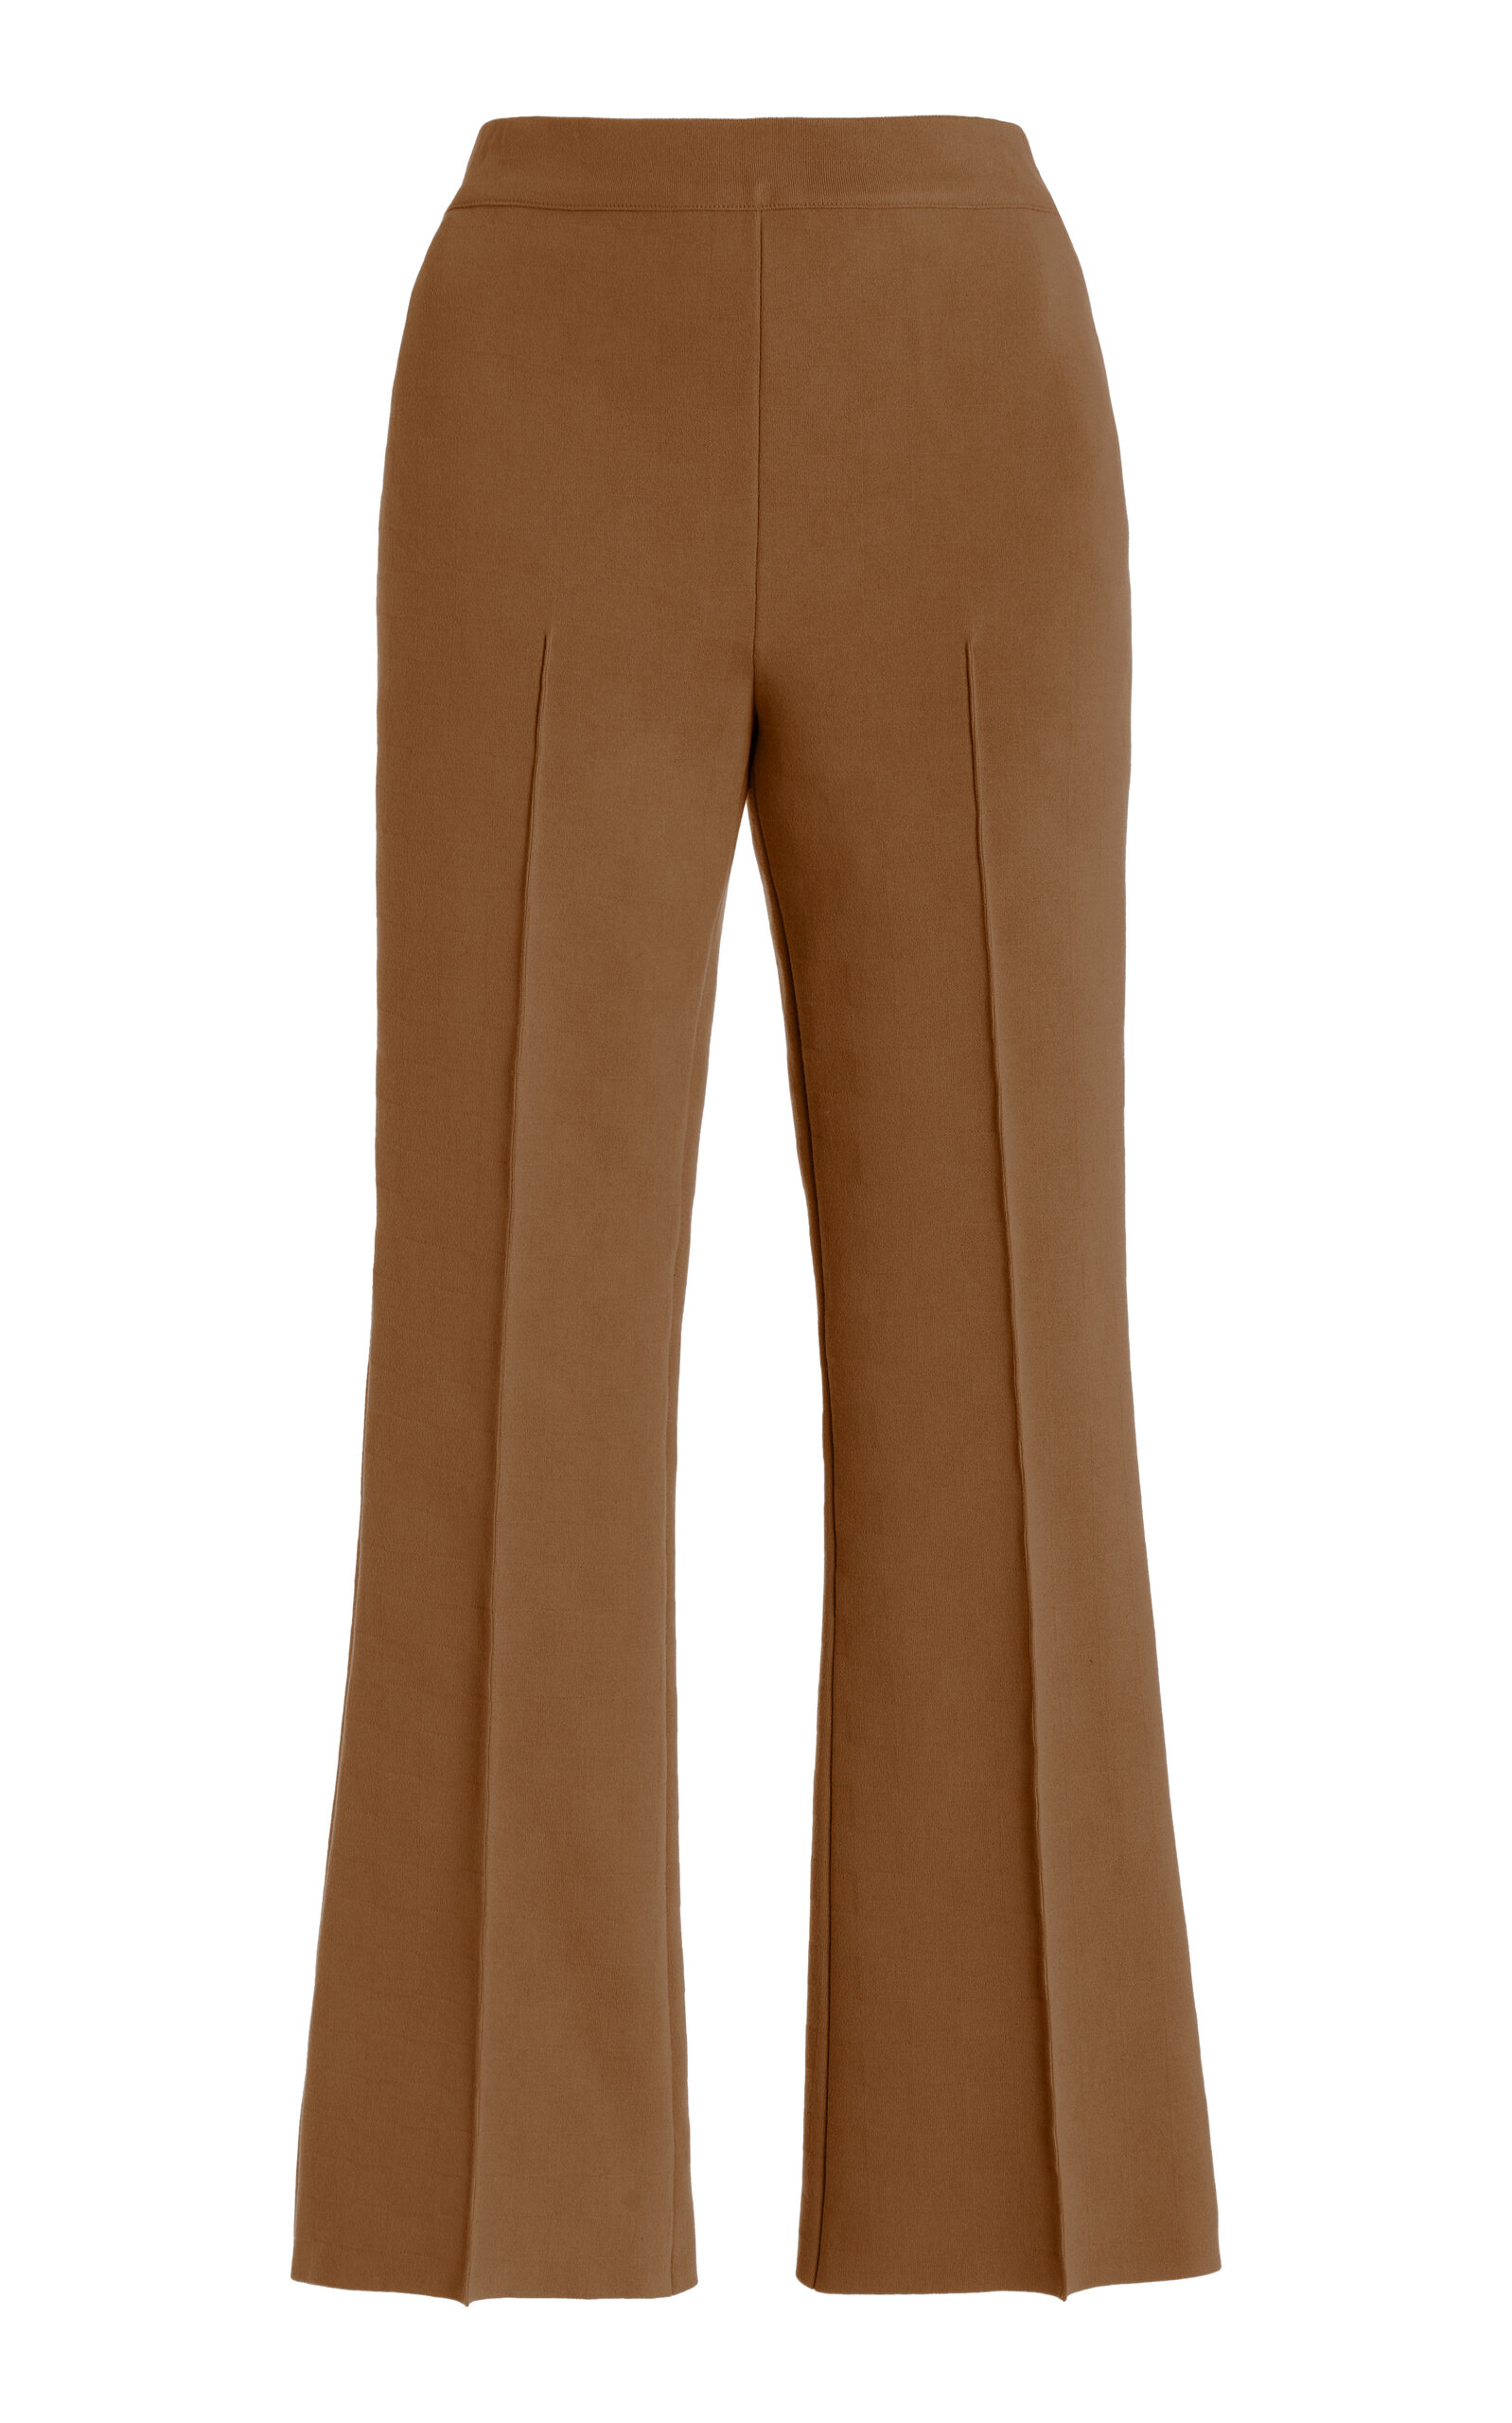 Cherilyn suede flared pants in brown - Stouls